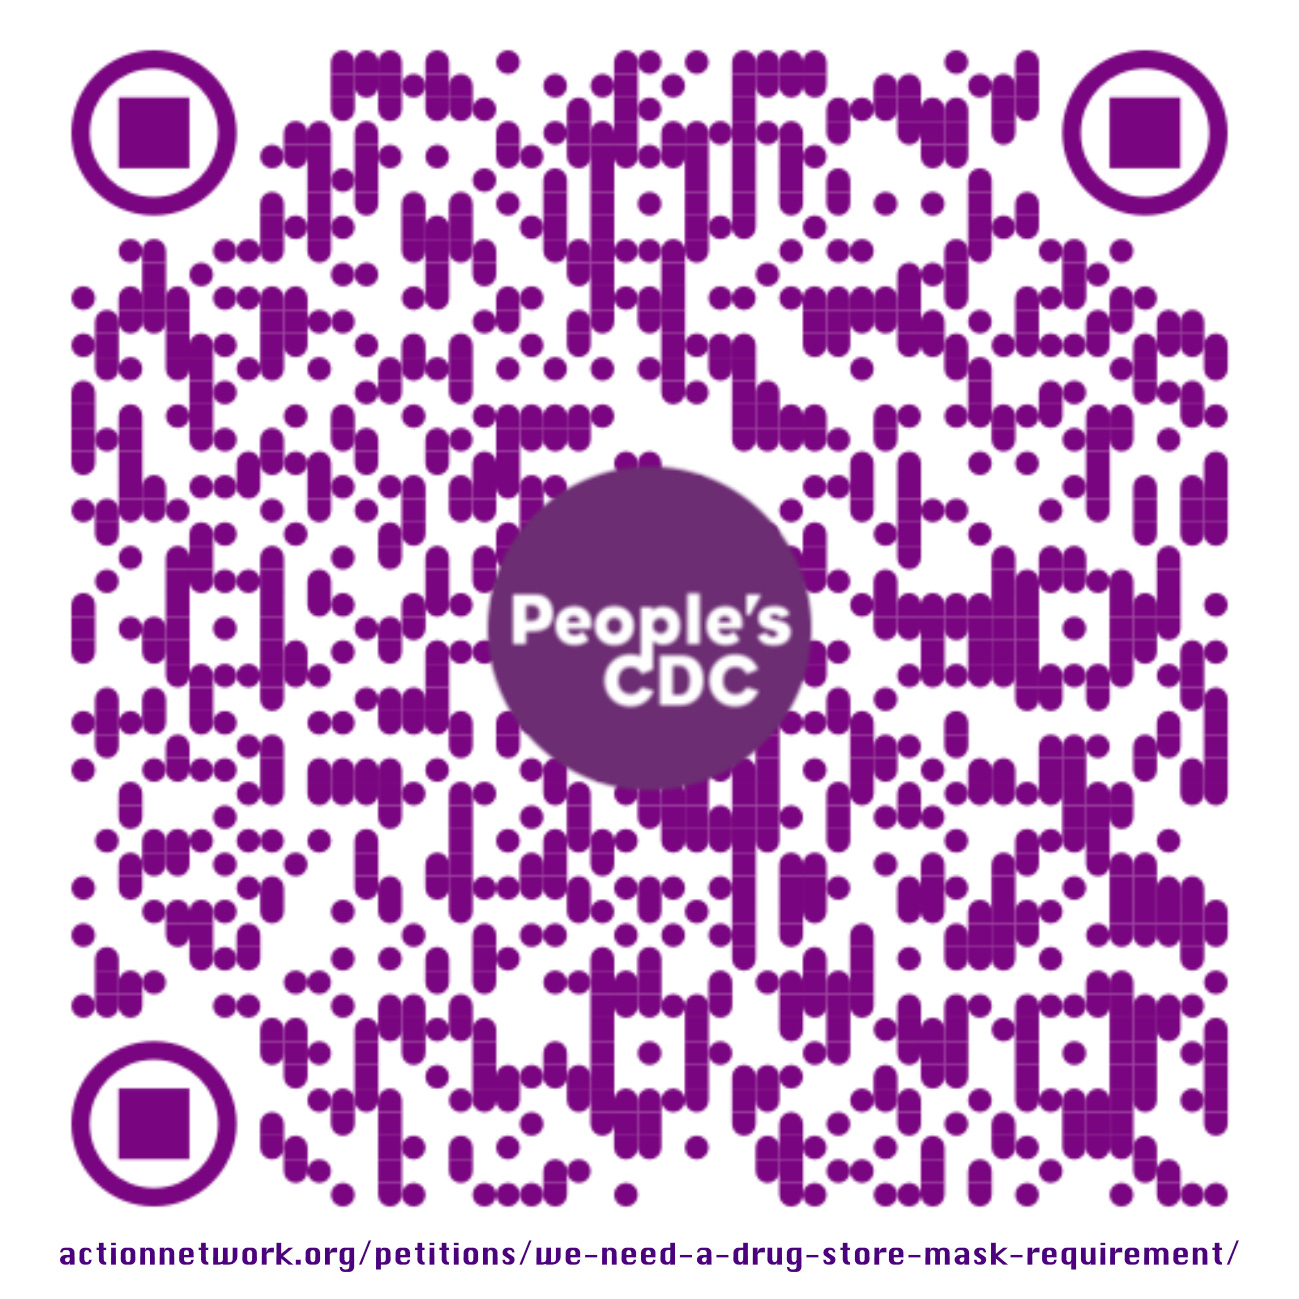 QR Code with People's CDC logo and the URL of the petition